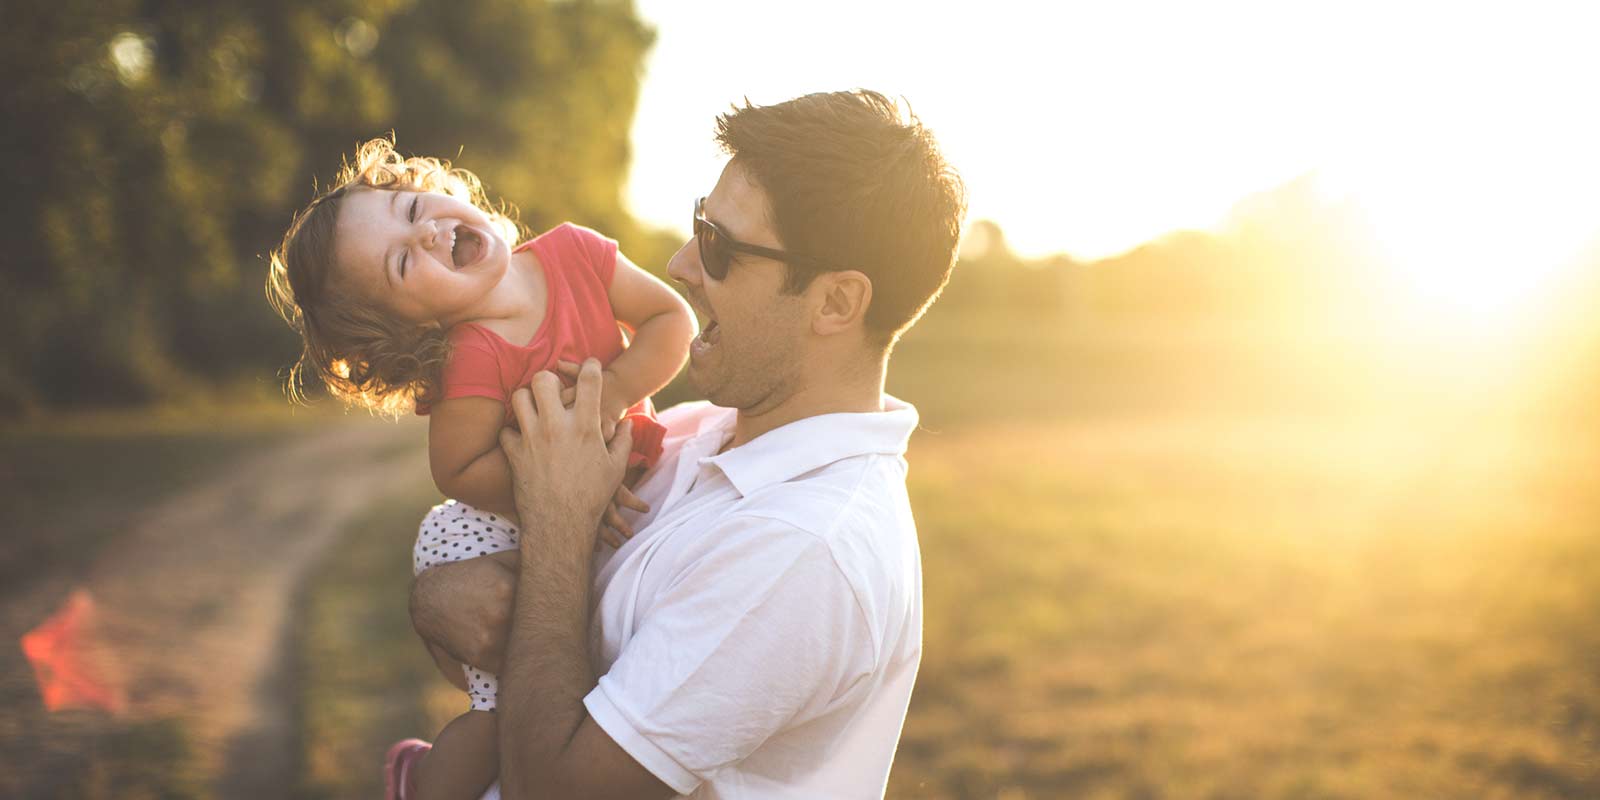 A little girl laughs as her father tickles her tummy in the sunset.